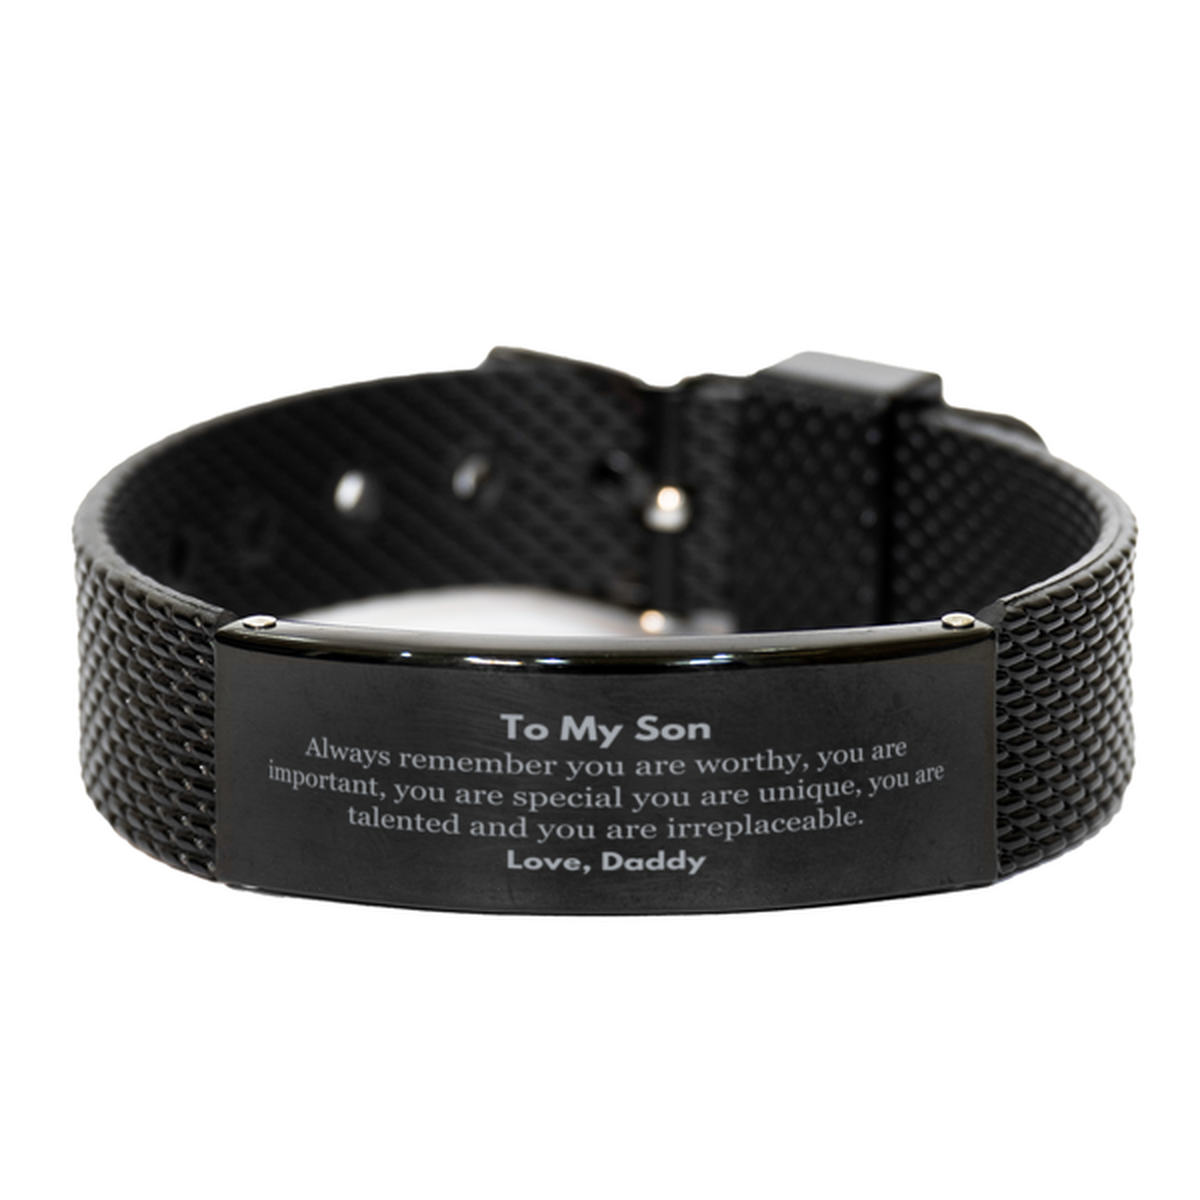 Son Birthday Gifts from Daddy, Inspirational Black Shark Mesh Bracelet for Son Christmas Graduation Gifts for Son Always remember you are worthy, you are important. Love, Daddy